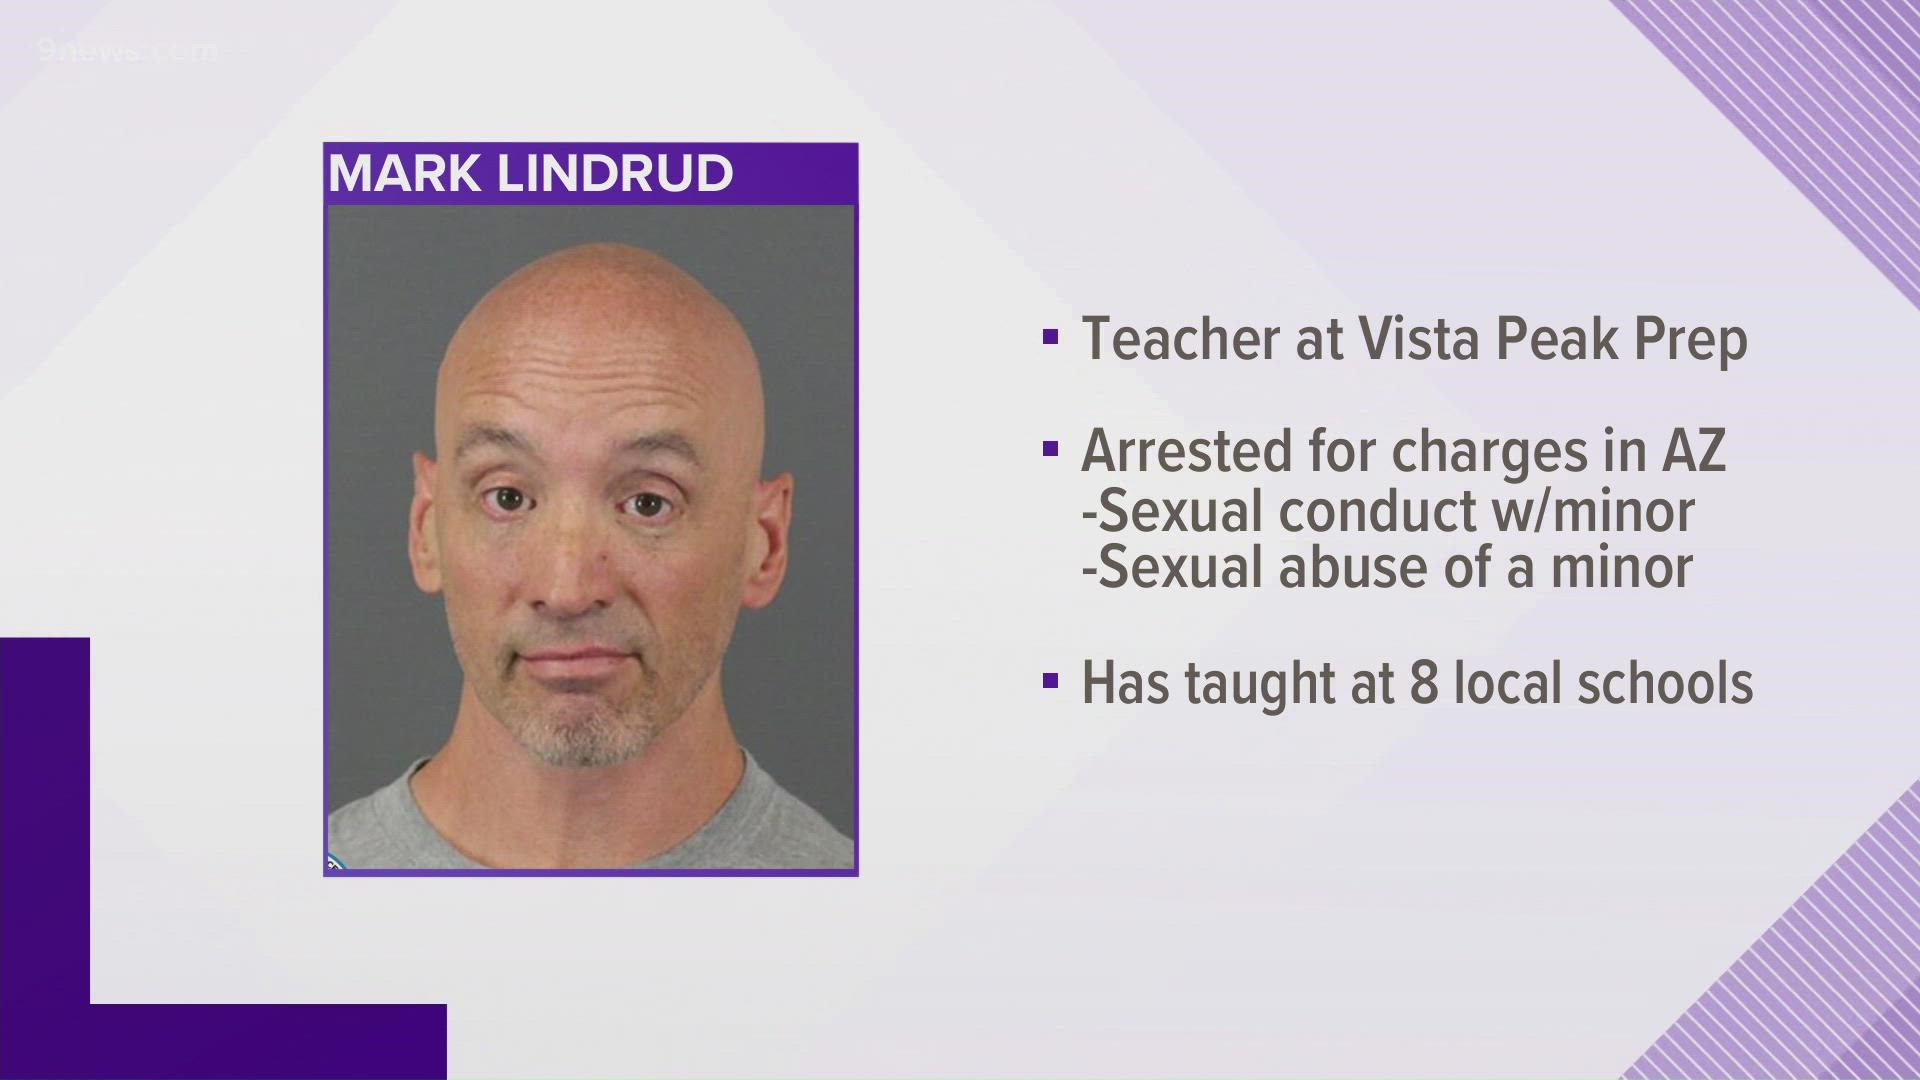 Mark Lindrud was arrested Thursday for a warrant issued in Arizona for multiple accounts of sexual conduct with minor and sexual abuse charges.